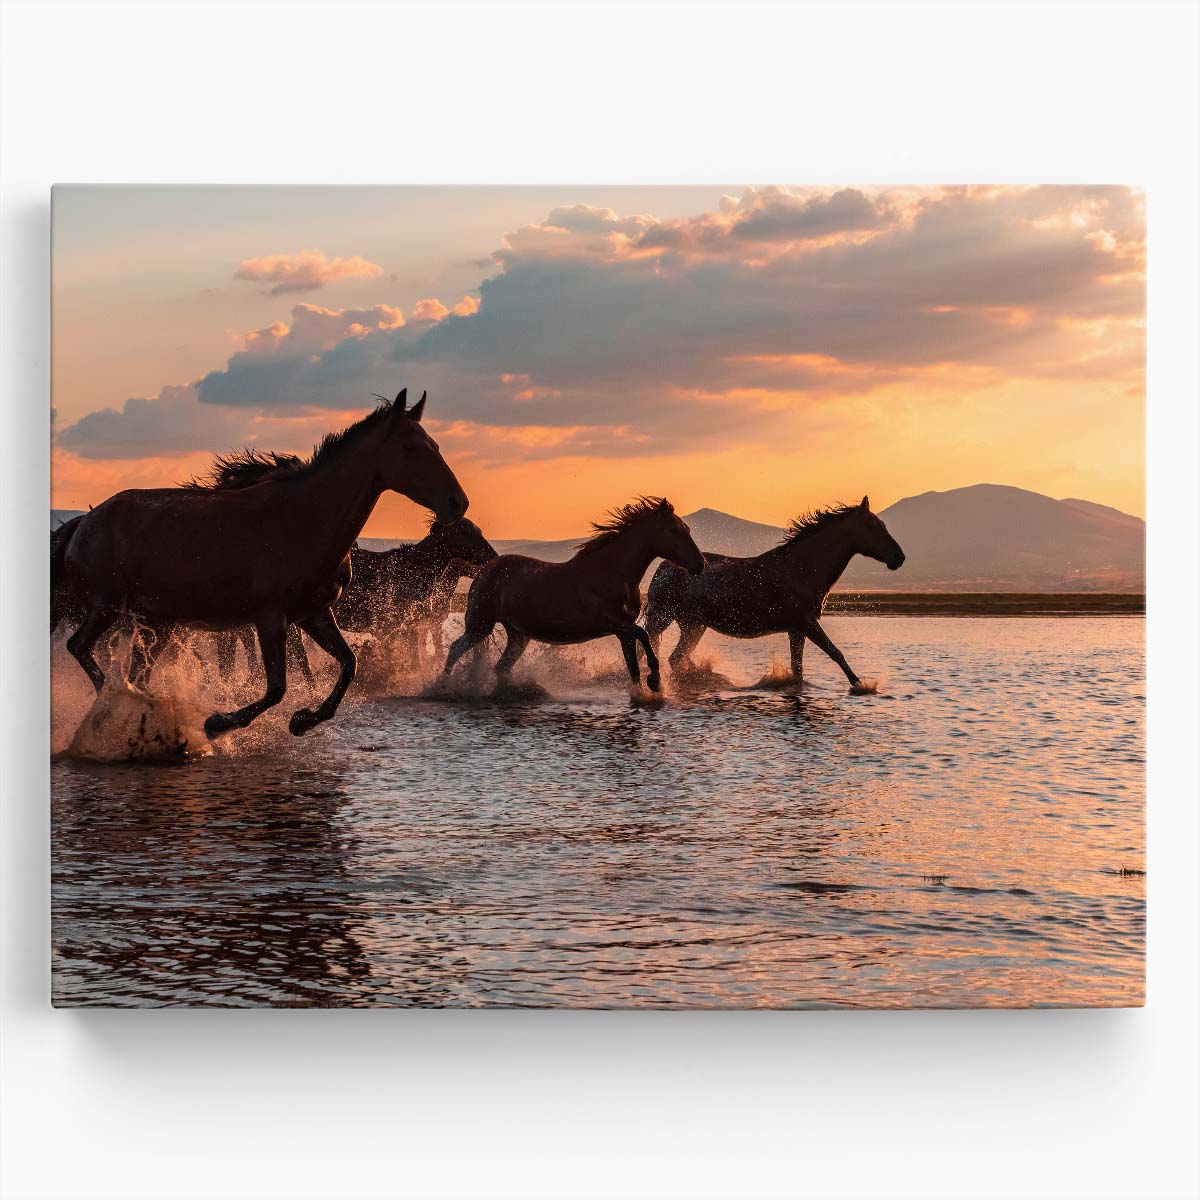 Wild Horses Galloping at Sunset Beach Photography Wall Art by Luxuriance Designs. Made in USA.